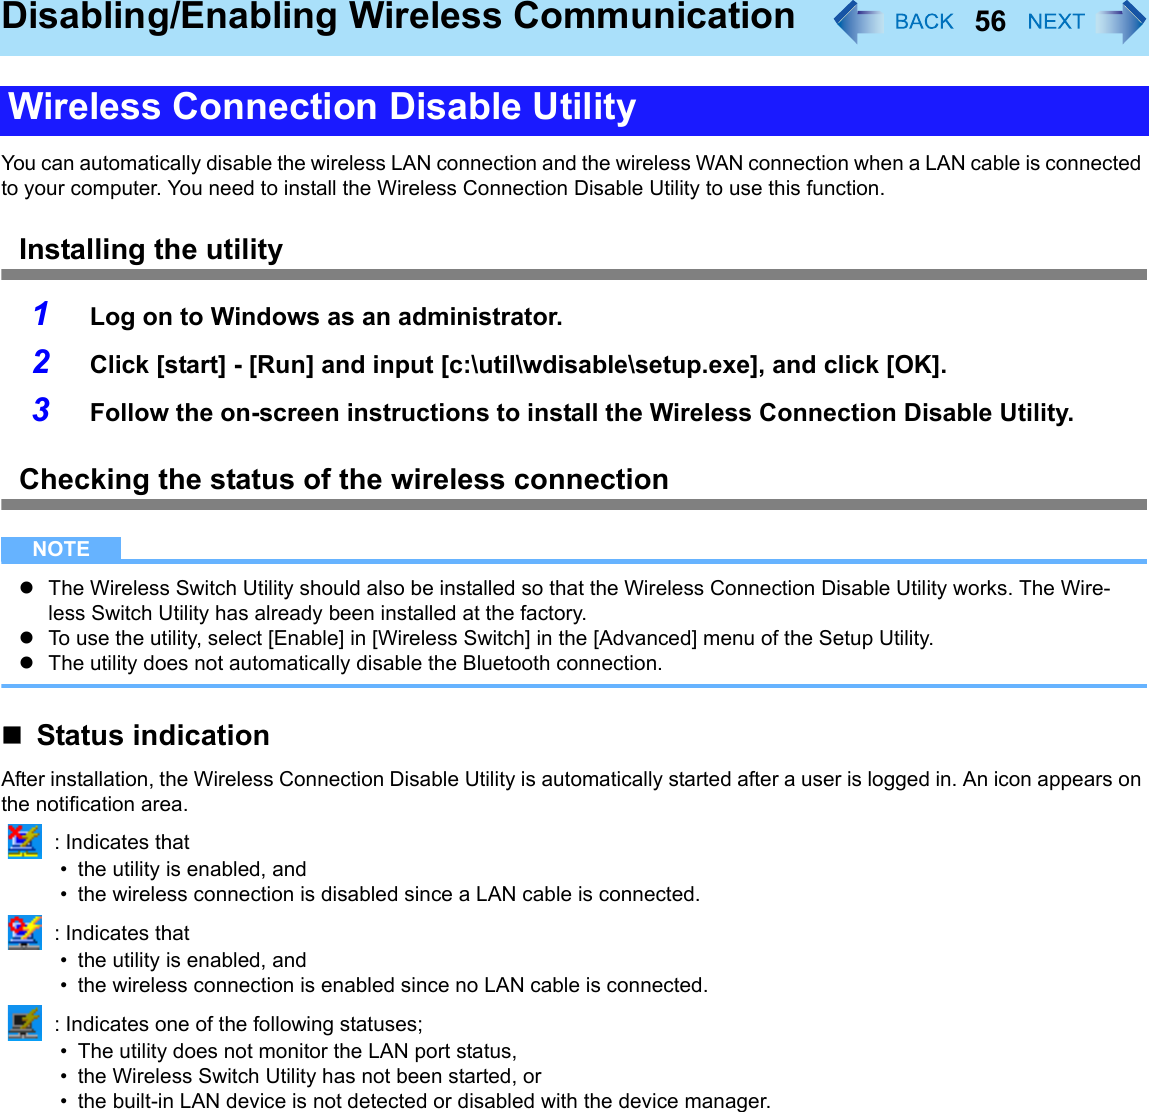 56Disabling/Enabling Wireless CommunicationYou can automatically disable the wireless LAN connection and the wireless WAN connection when a LAN cable is connected to your computer. You need to install the Wireless Connection Disable Utility to use this function.Installing the utility1Log on to Windows as an administrator.2Click [start] - [Run] and input [c:\util\wdisable\setup.exe], and click [OK].3Follow the on-screen instructions to install the Wireless Connection Disable Utility.Checking the status of the wireless connectionNOTEzThe Wireless Switch Utility should also be installed so that the Wireless Connection Disable Utility works. The Wire-less Switch Utility has already been installed at the factory.zTo use the utility, select [Enable] in [Wireless Switch] in the [Advanced] menu of the Setup Utility.zThe utility does not automatically disable the Bluetooth connection.Status indicationAfter installation, the Wireless Connection Disable Utility is automatically started after a user is logged in. An icon appears on the notification area. : Indicates that• the utility is enabled, and• the wireless connection is disabled since a LAN cable is connected. : Indicates that• the utility is enabled, and• the wireless connection is enabled since no LAN cable is connected. : Indicates one of the following statuses;• The utility does not monitor the LAN port status,• the Wireless Switch Utility has not been started, or• the built-in LAN device is not detected or disabled with the device manager.Wireless Connection Disable Utility